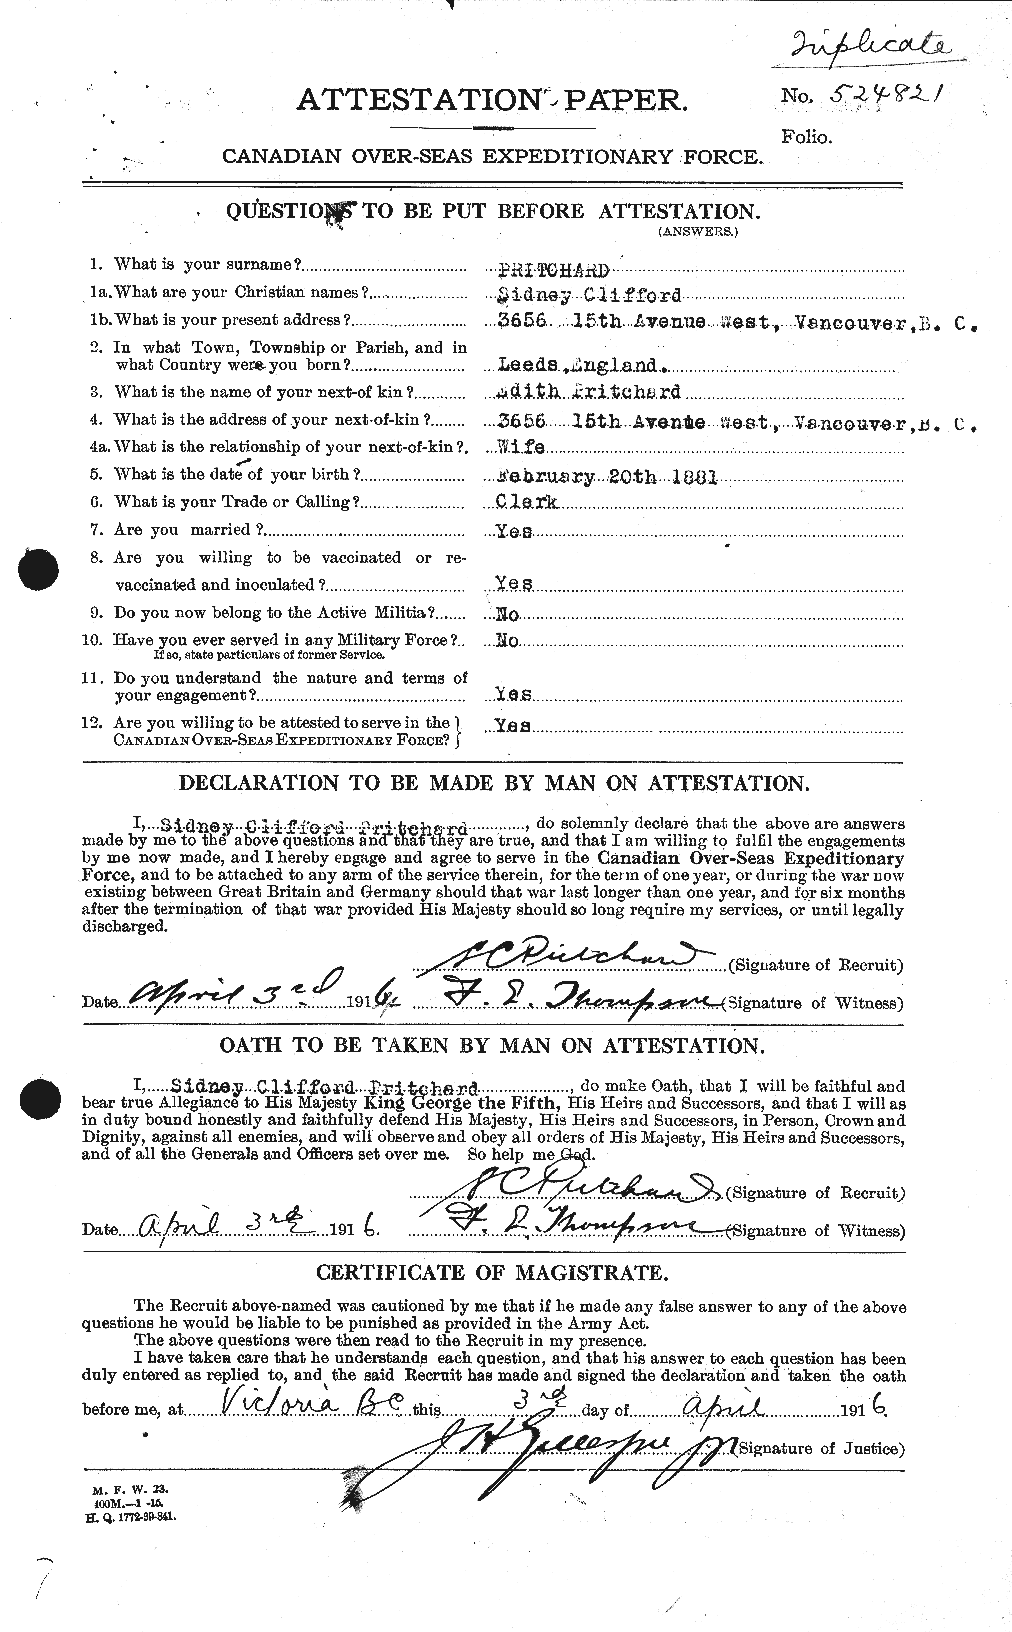 Personnel Records of the First World War - CEF 588608a